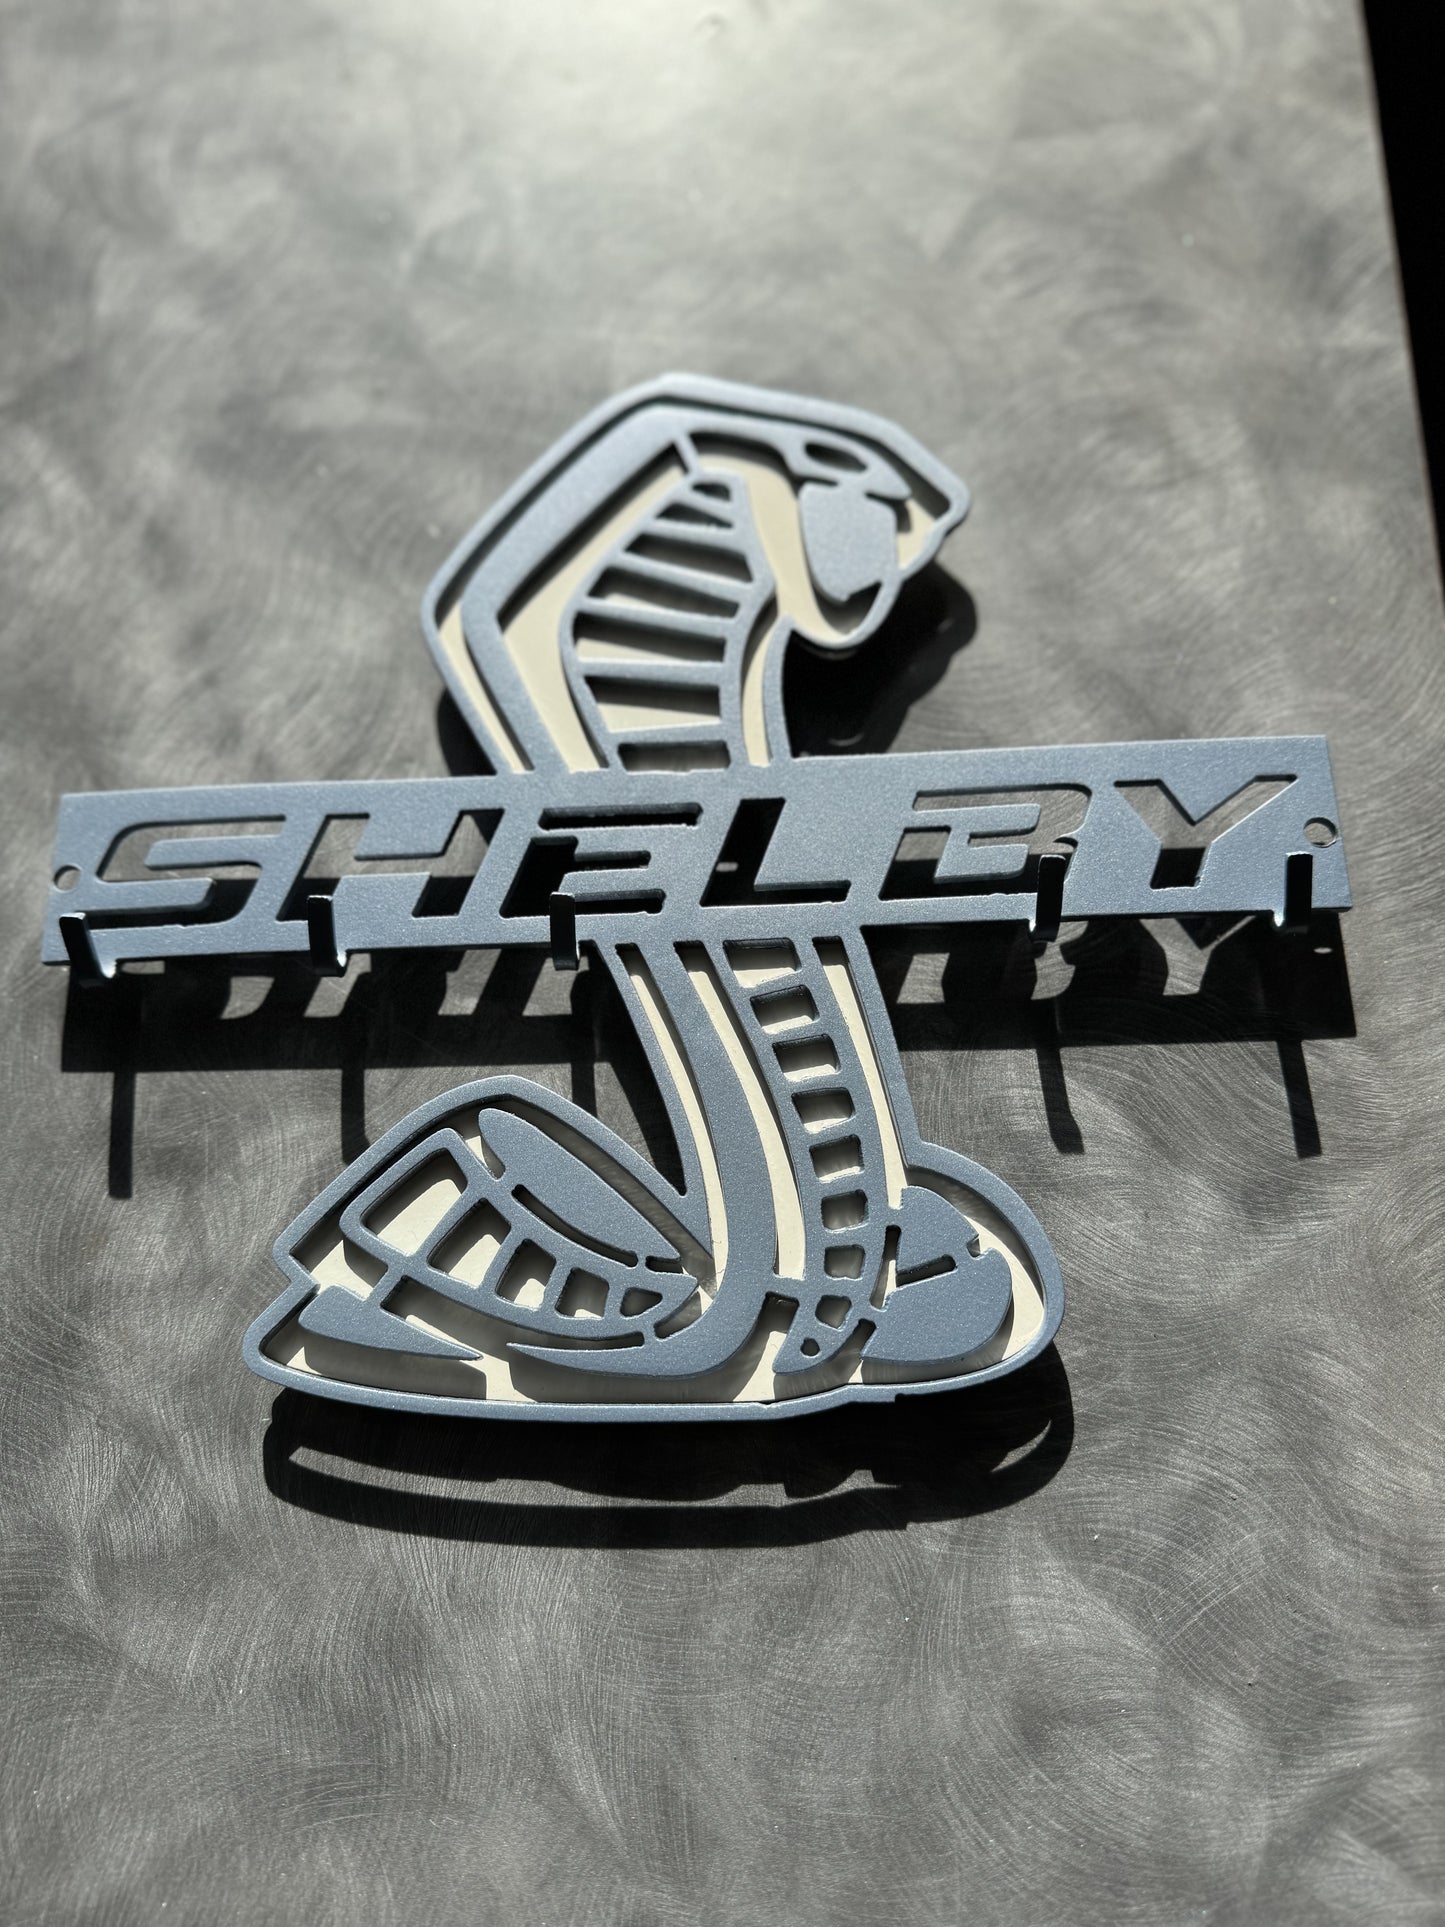 Shelby heritage edition key hanger